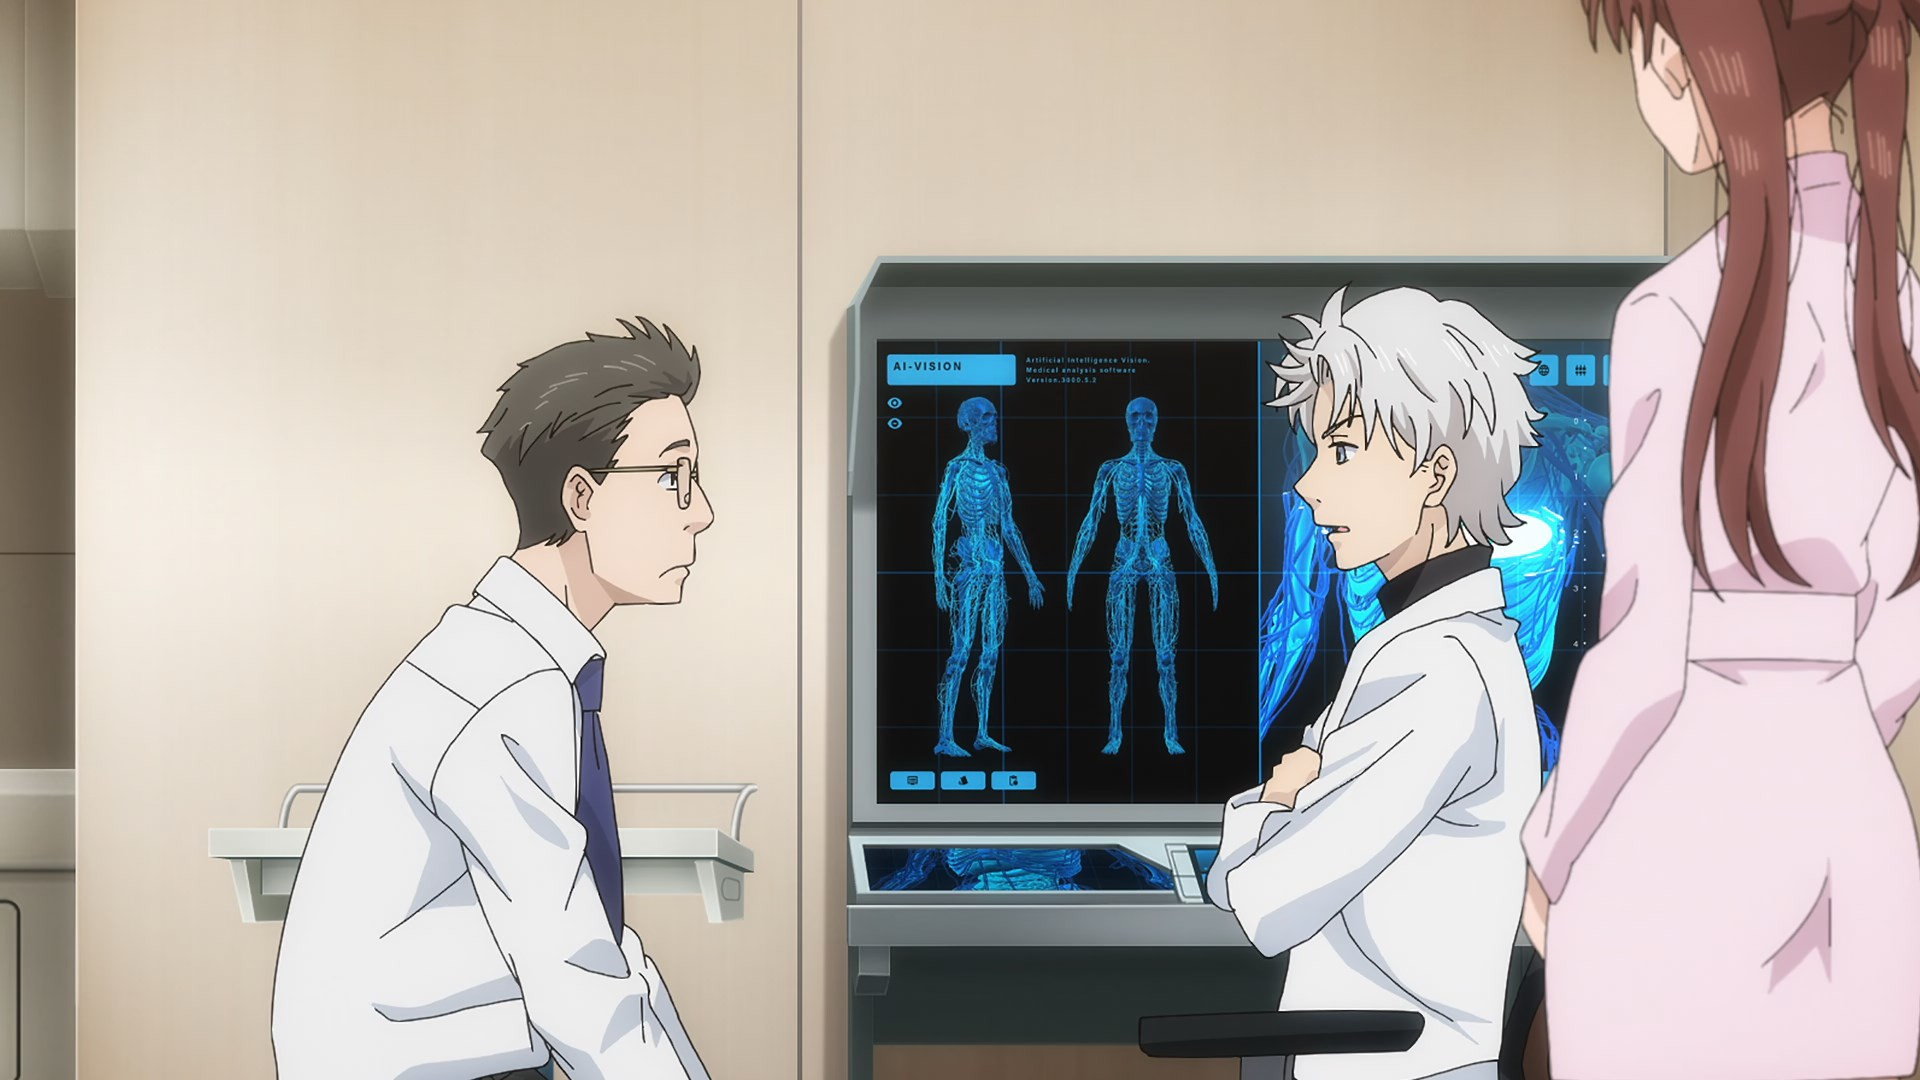 A.I.R (Anime Intelligence (and) Research) on X: New visual for